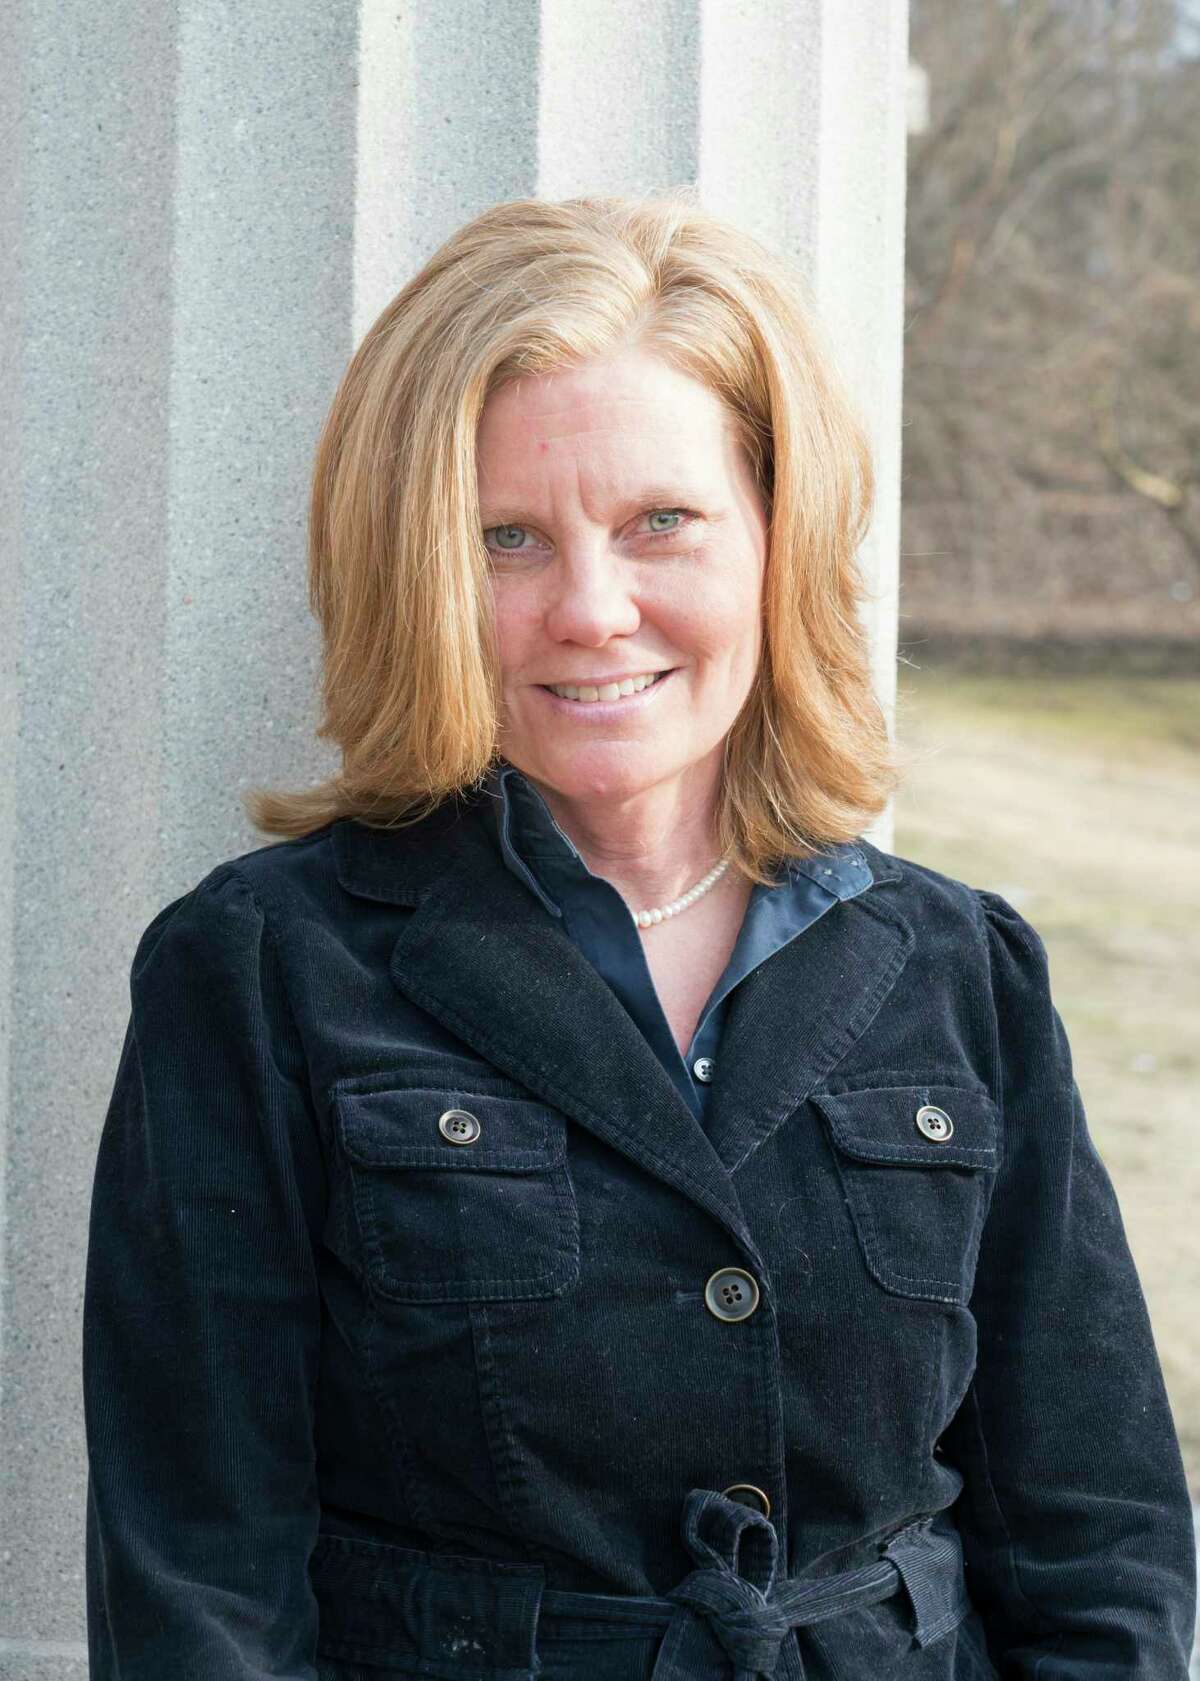 Patricia Morrison announced Saturday, April 13, 2019, that she is running for the Saratoga Springs finance commissioner's seat currently held by Michelle Madigan. (Provided photo)